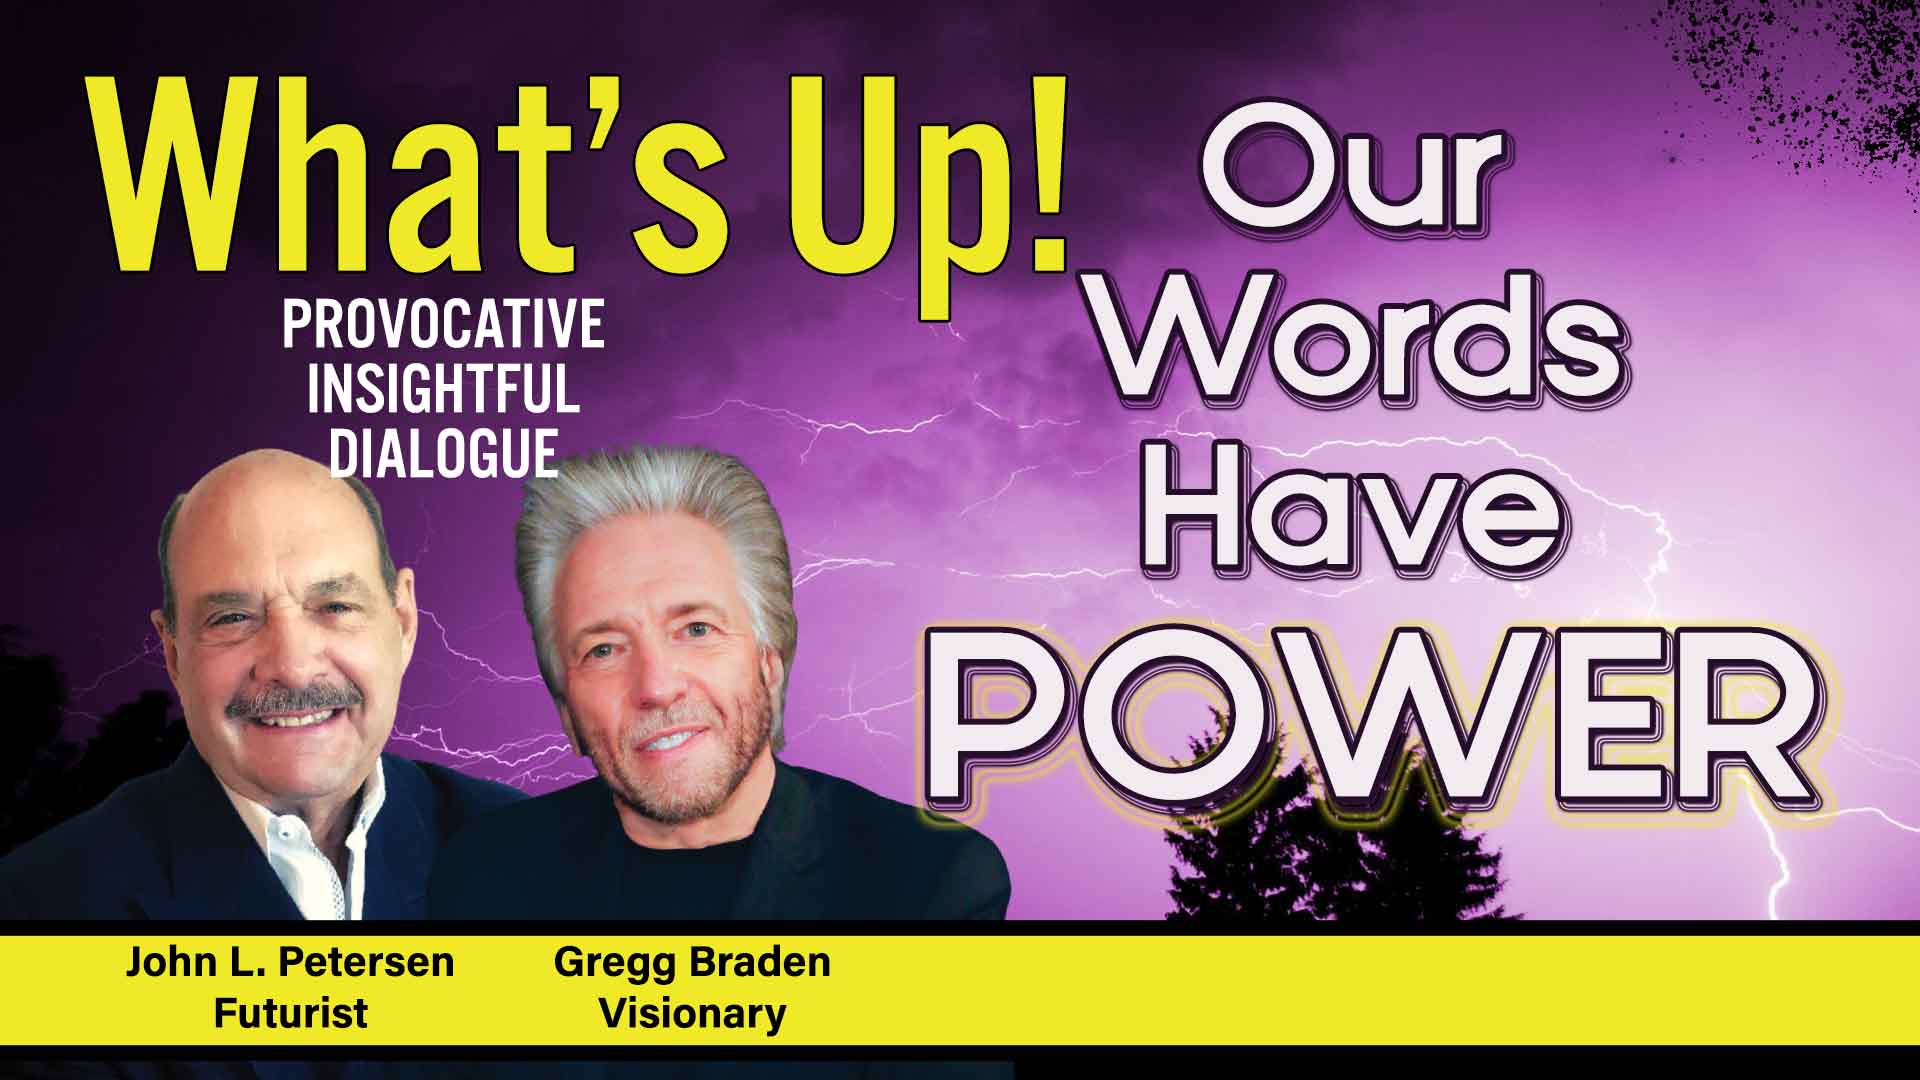 What's Up! Premium - Our words have power